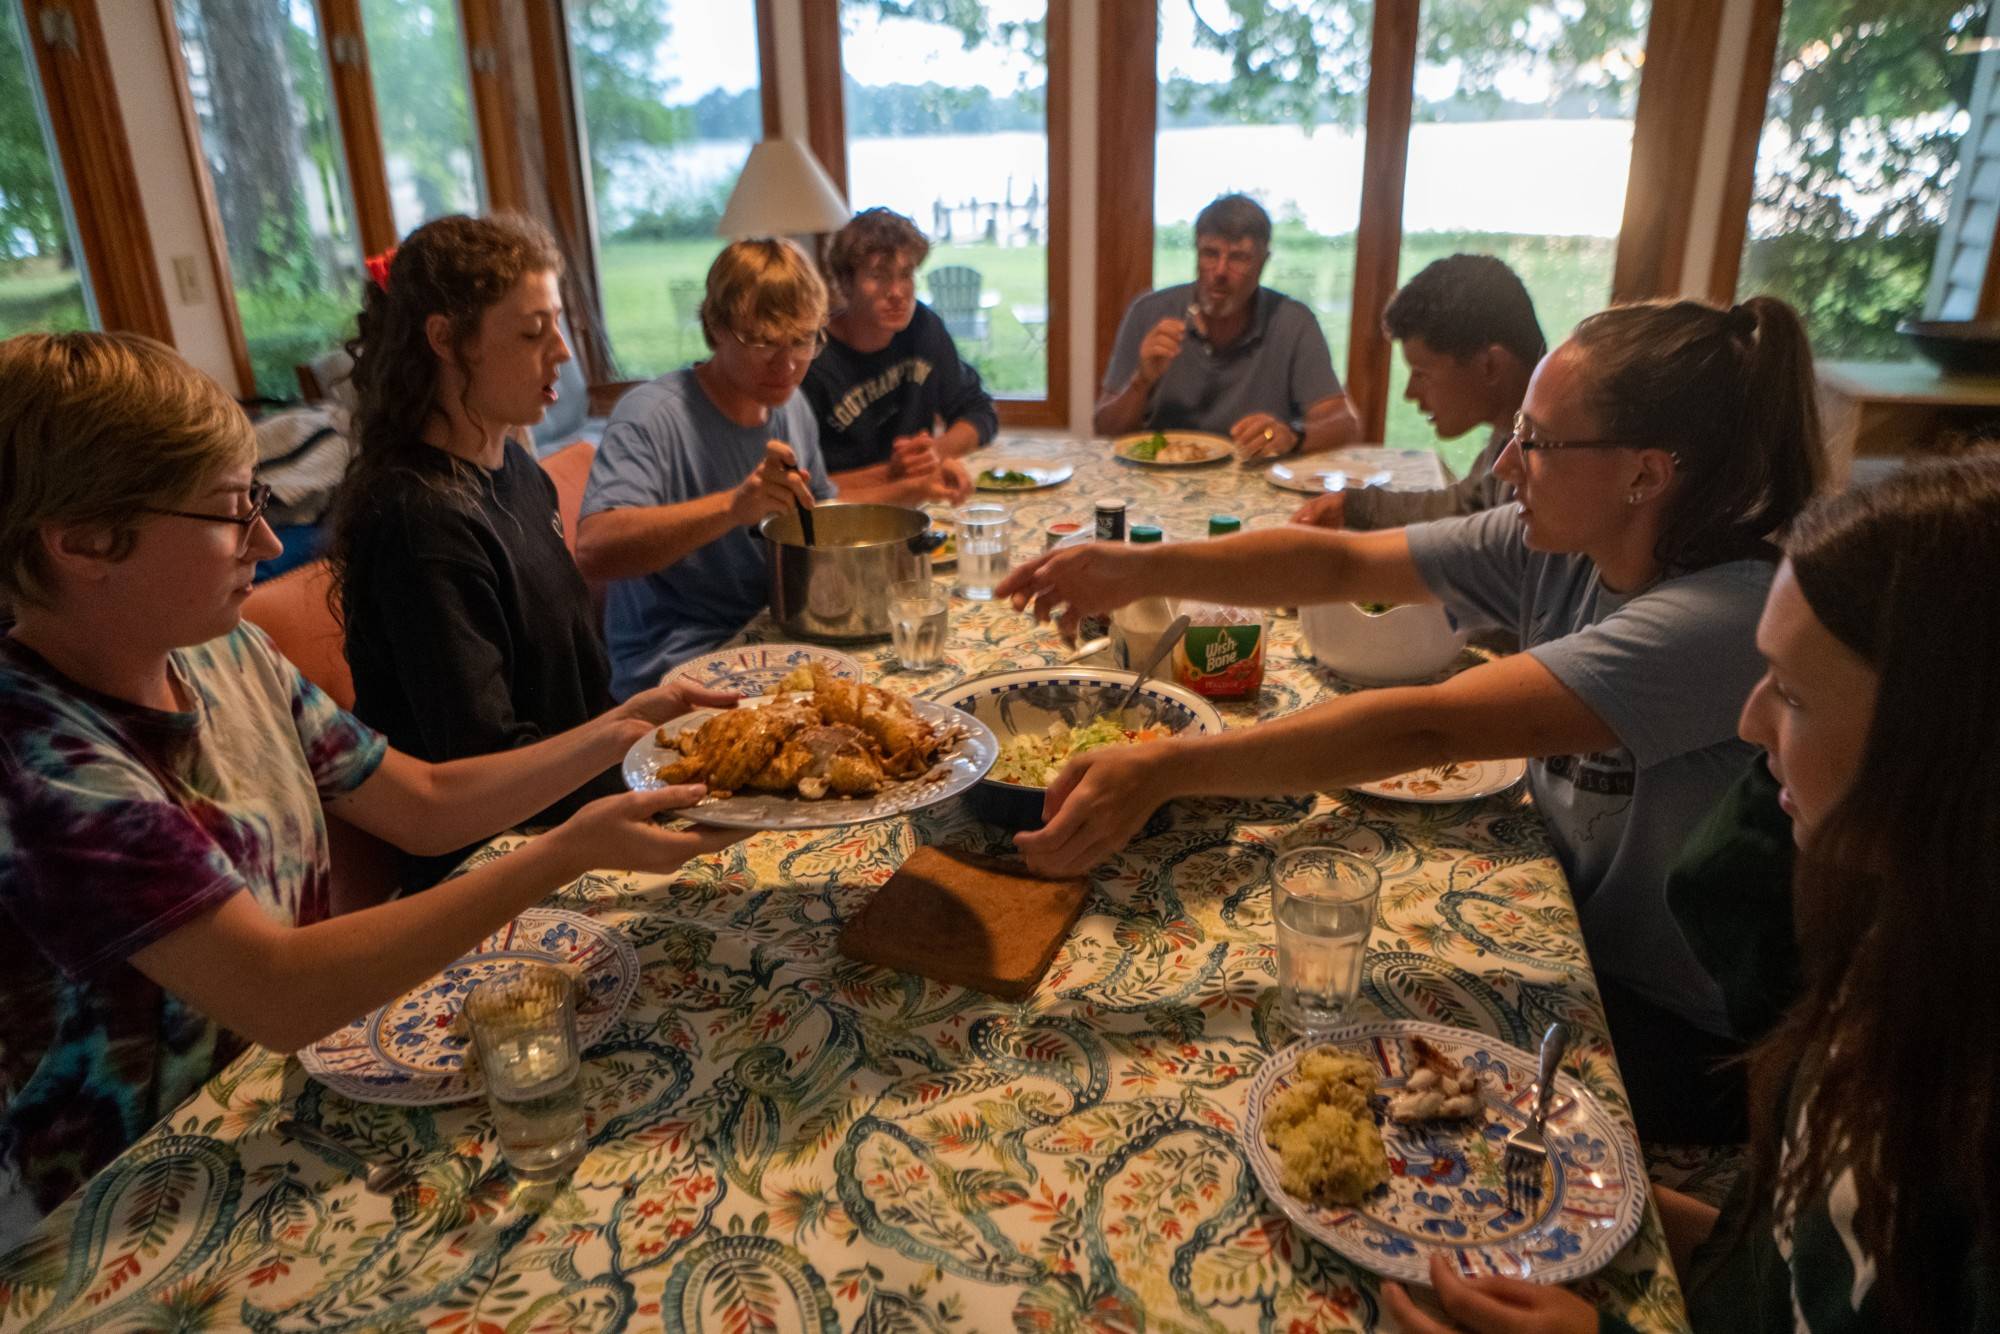 Students enjoy fresh caught snakehead fish family style at Roosenberg's home.